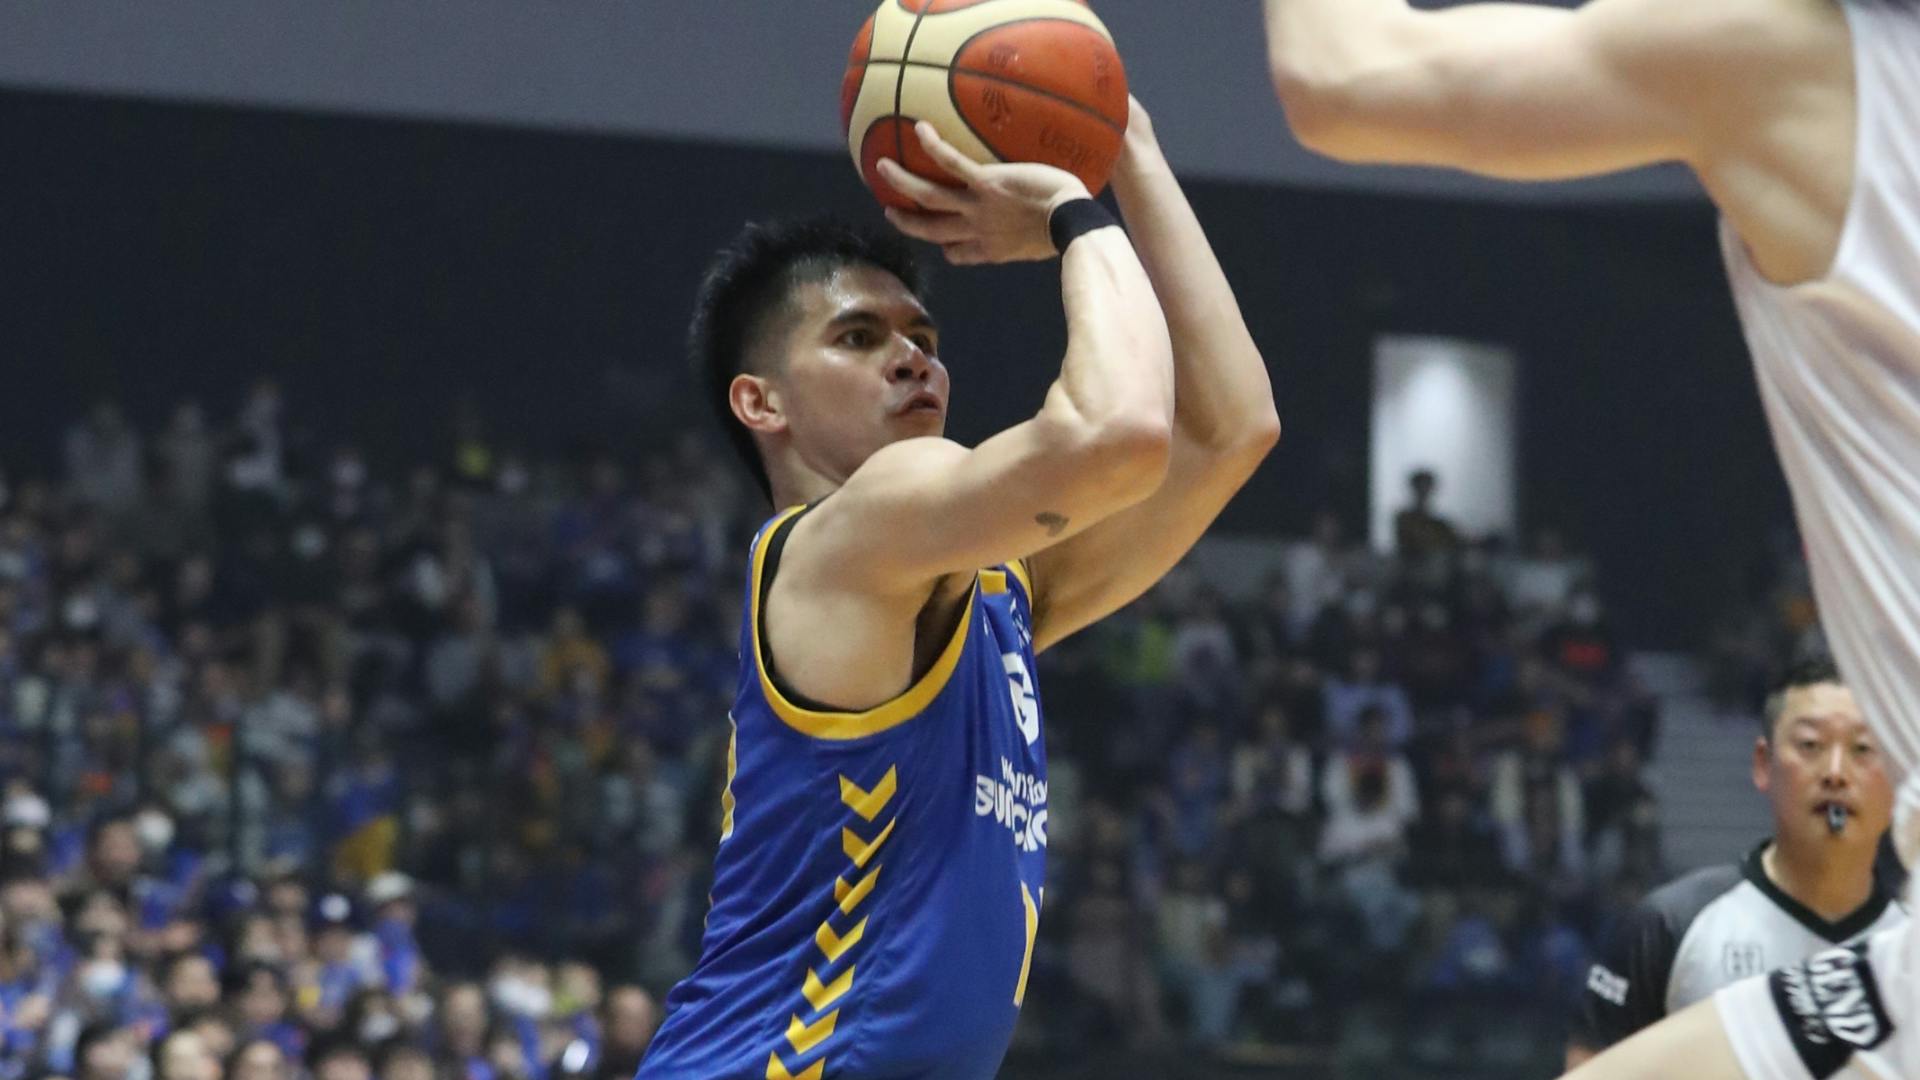 Kiefer Ravena scores 15 in the 2nd half as Shiga Lakes close in on B.League Division 1 return